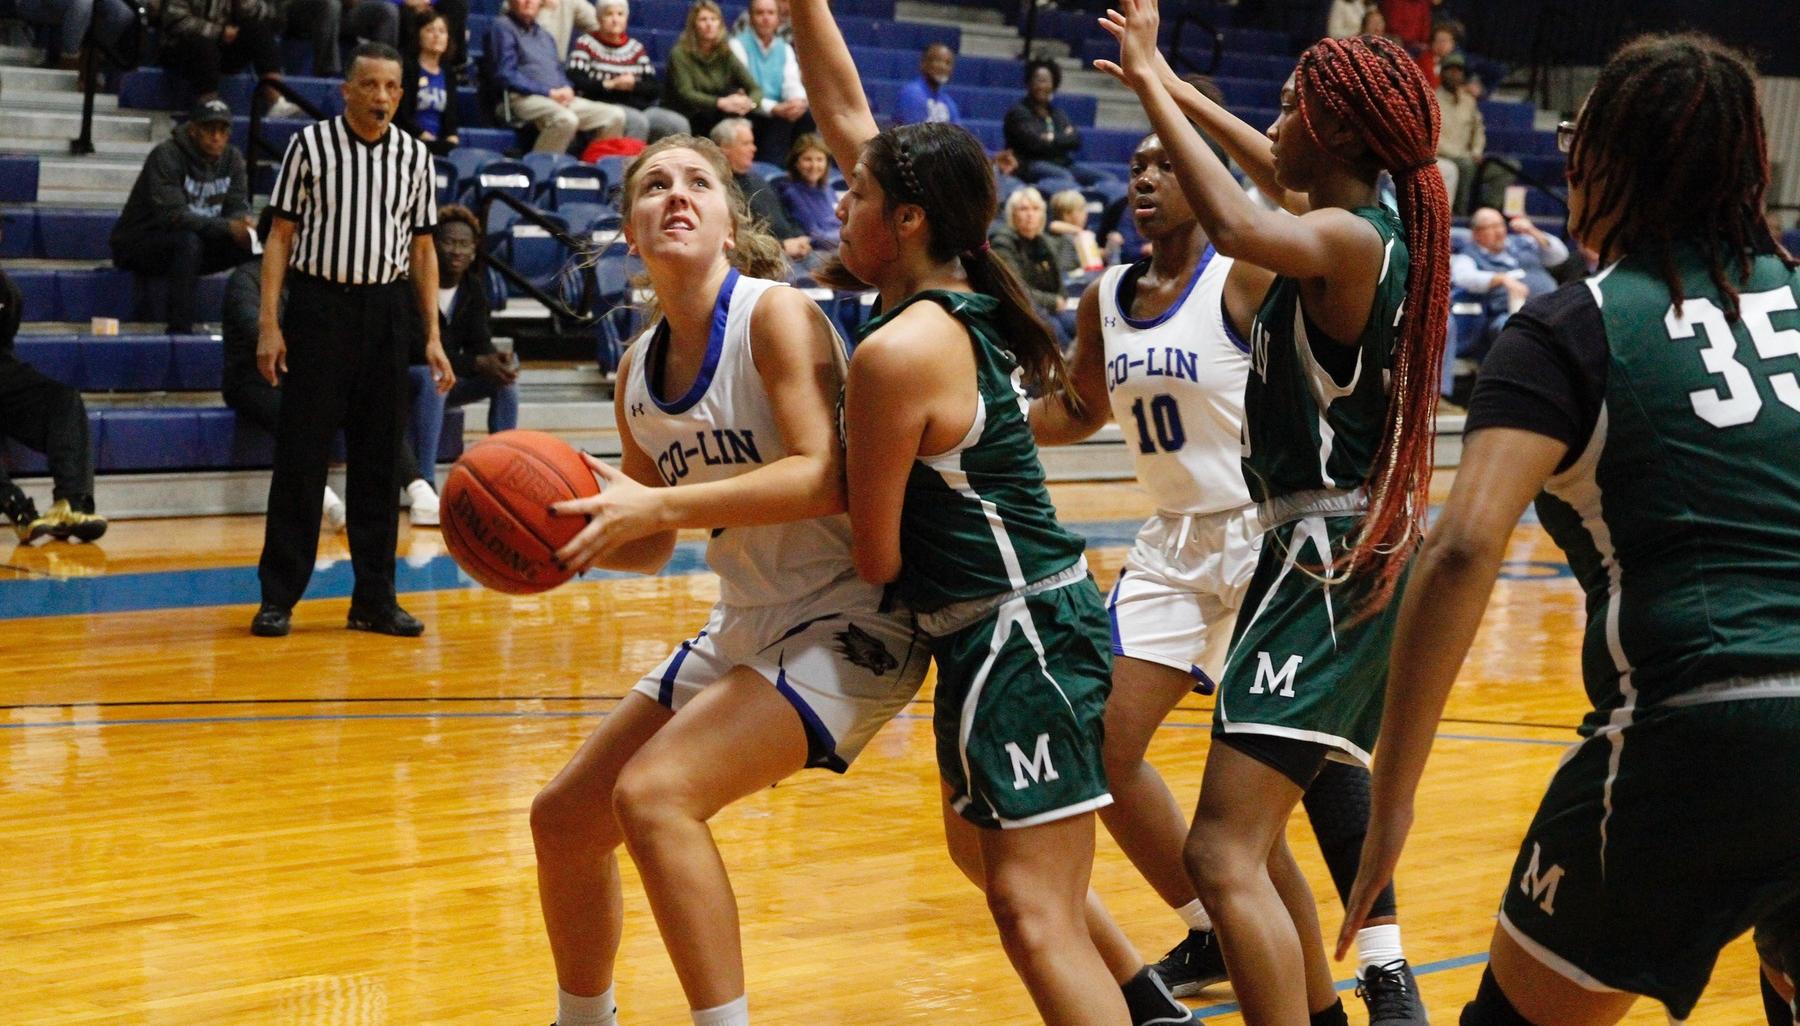 Lady Wolves fall to Lady Eagles in home matchup